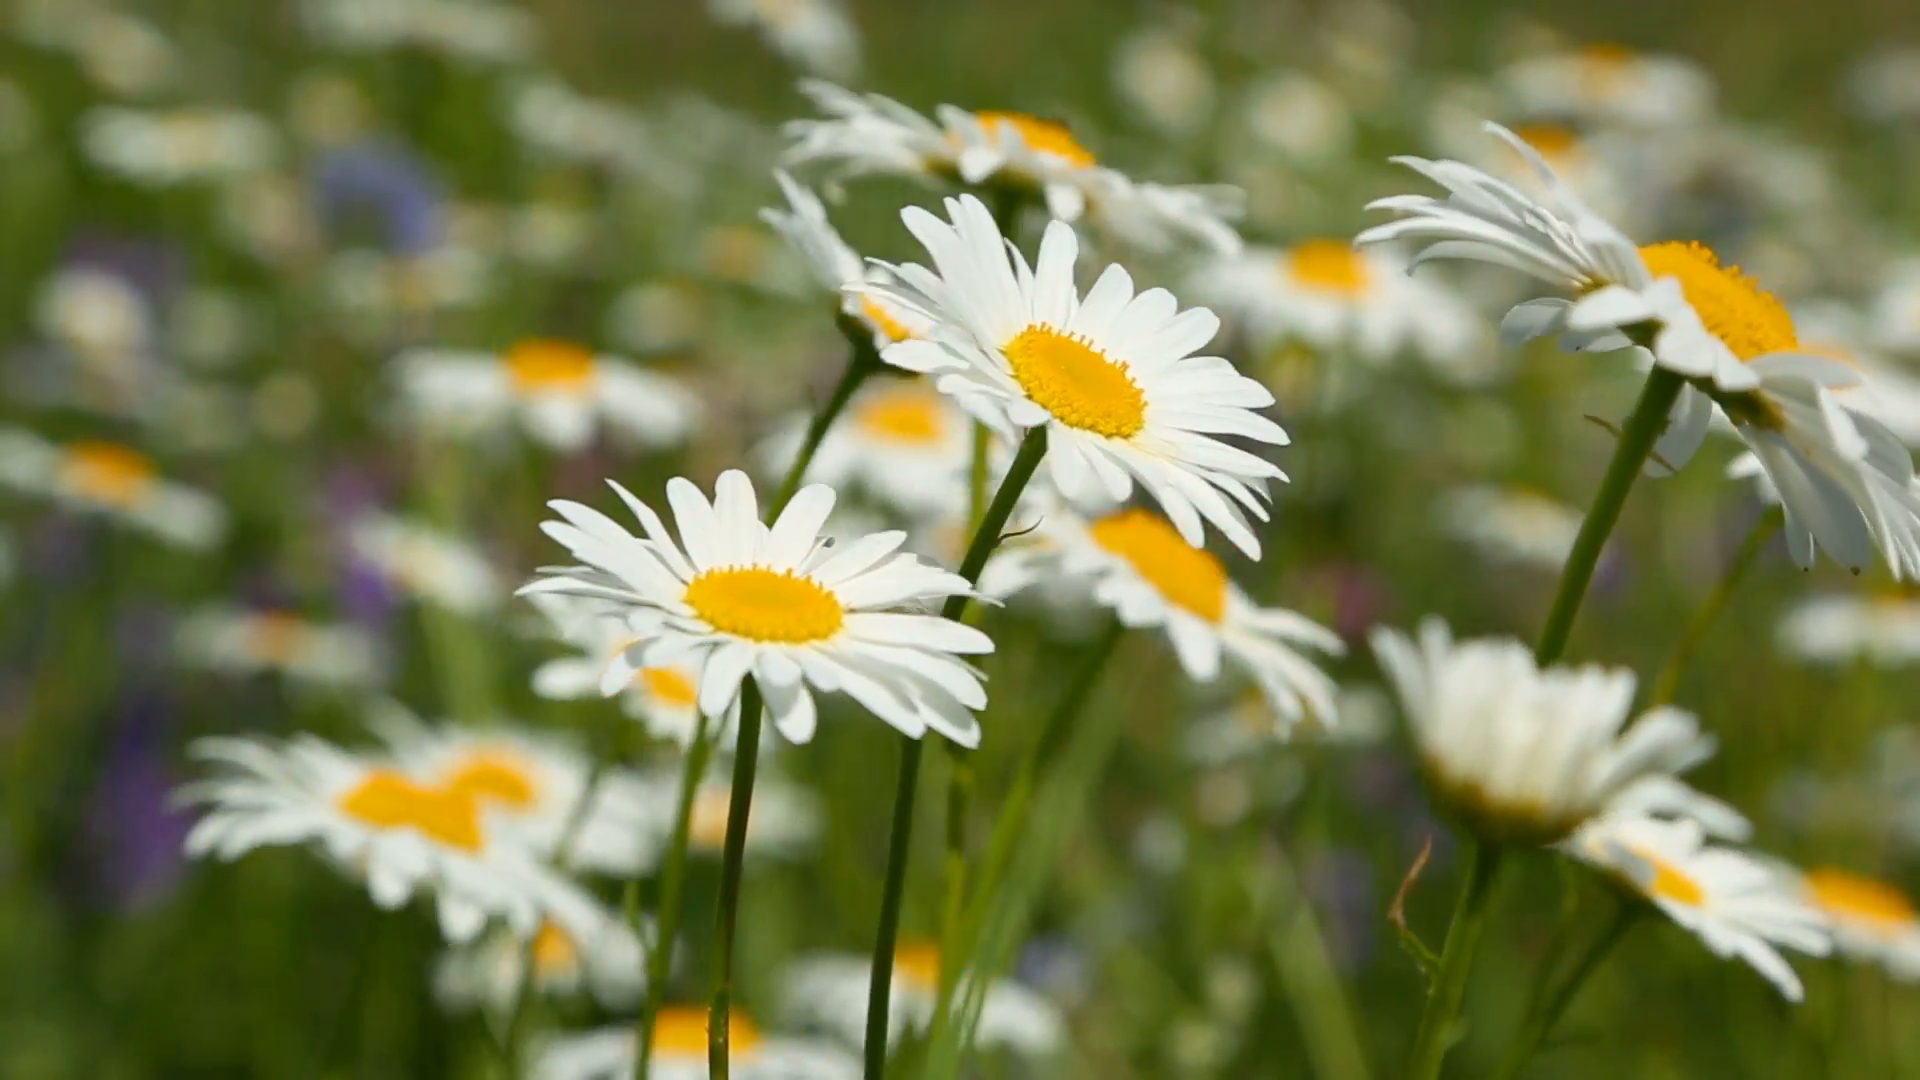 daisies on a meadow - shot with shallow DOF Stock Video Footage ...